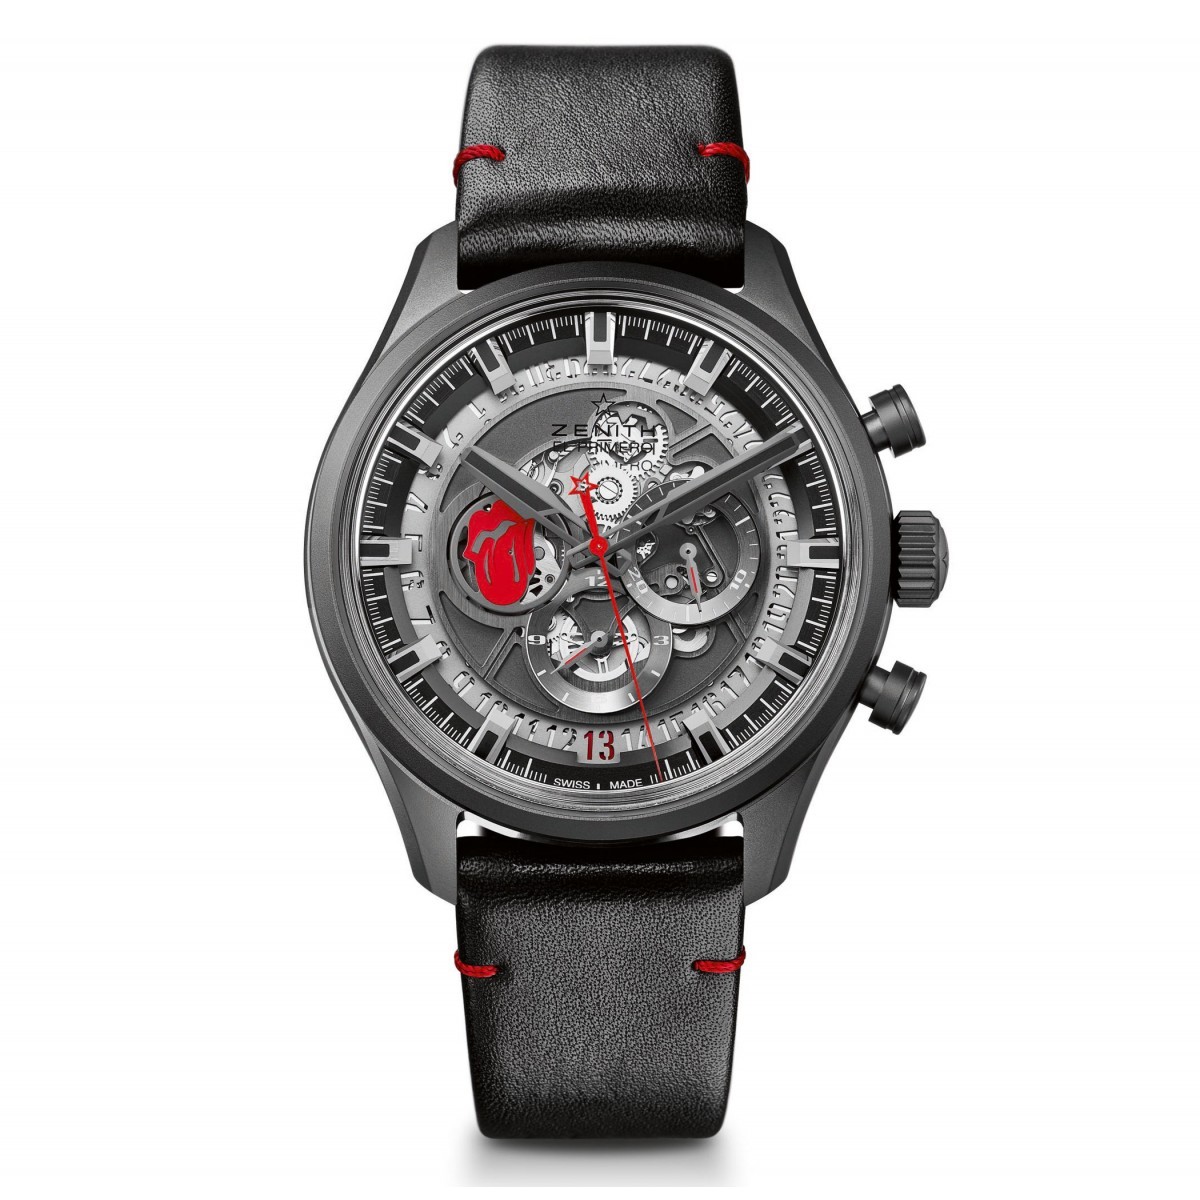 El Primero Rolling Stones Chronograph 45mm in Gunmetal Stainless Steel on Black Alligator Strap with Grey Index Dial